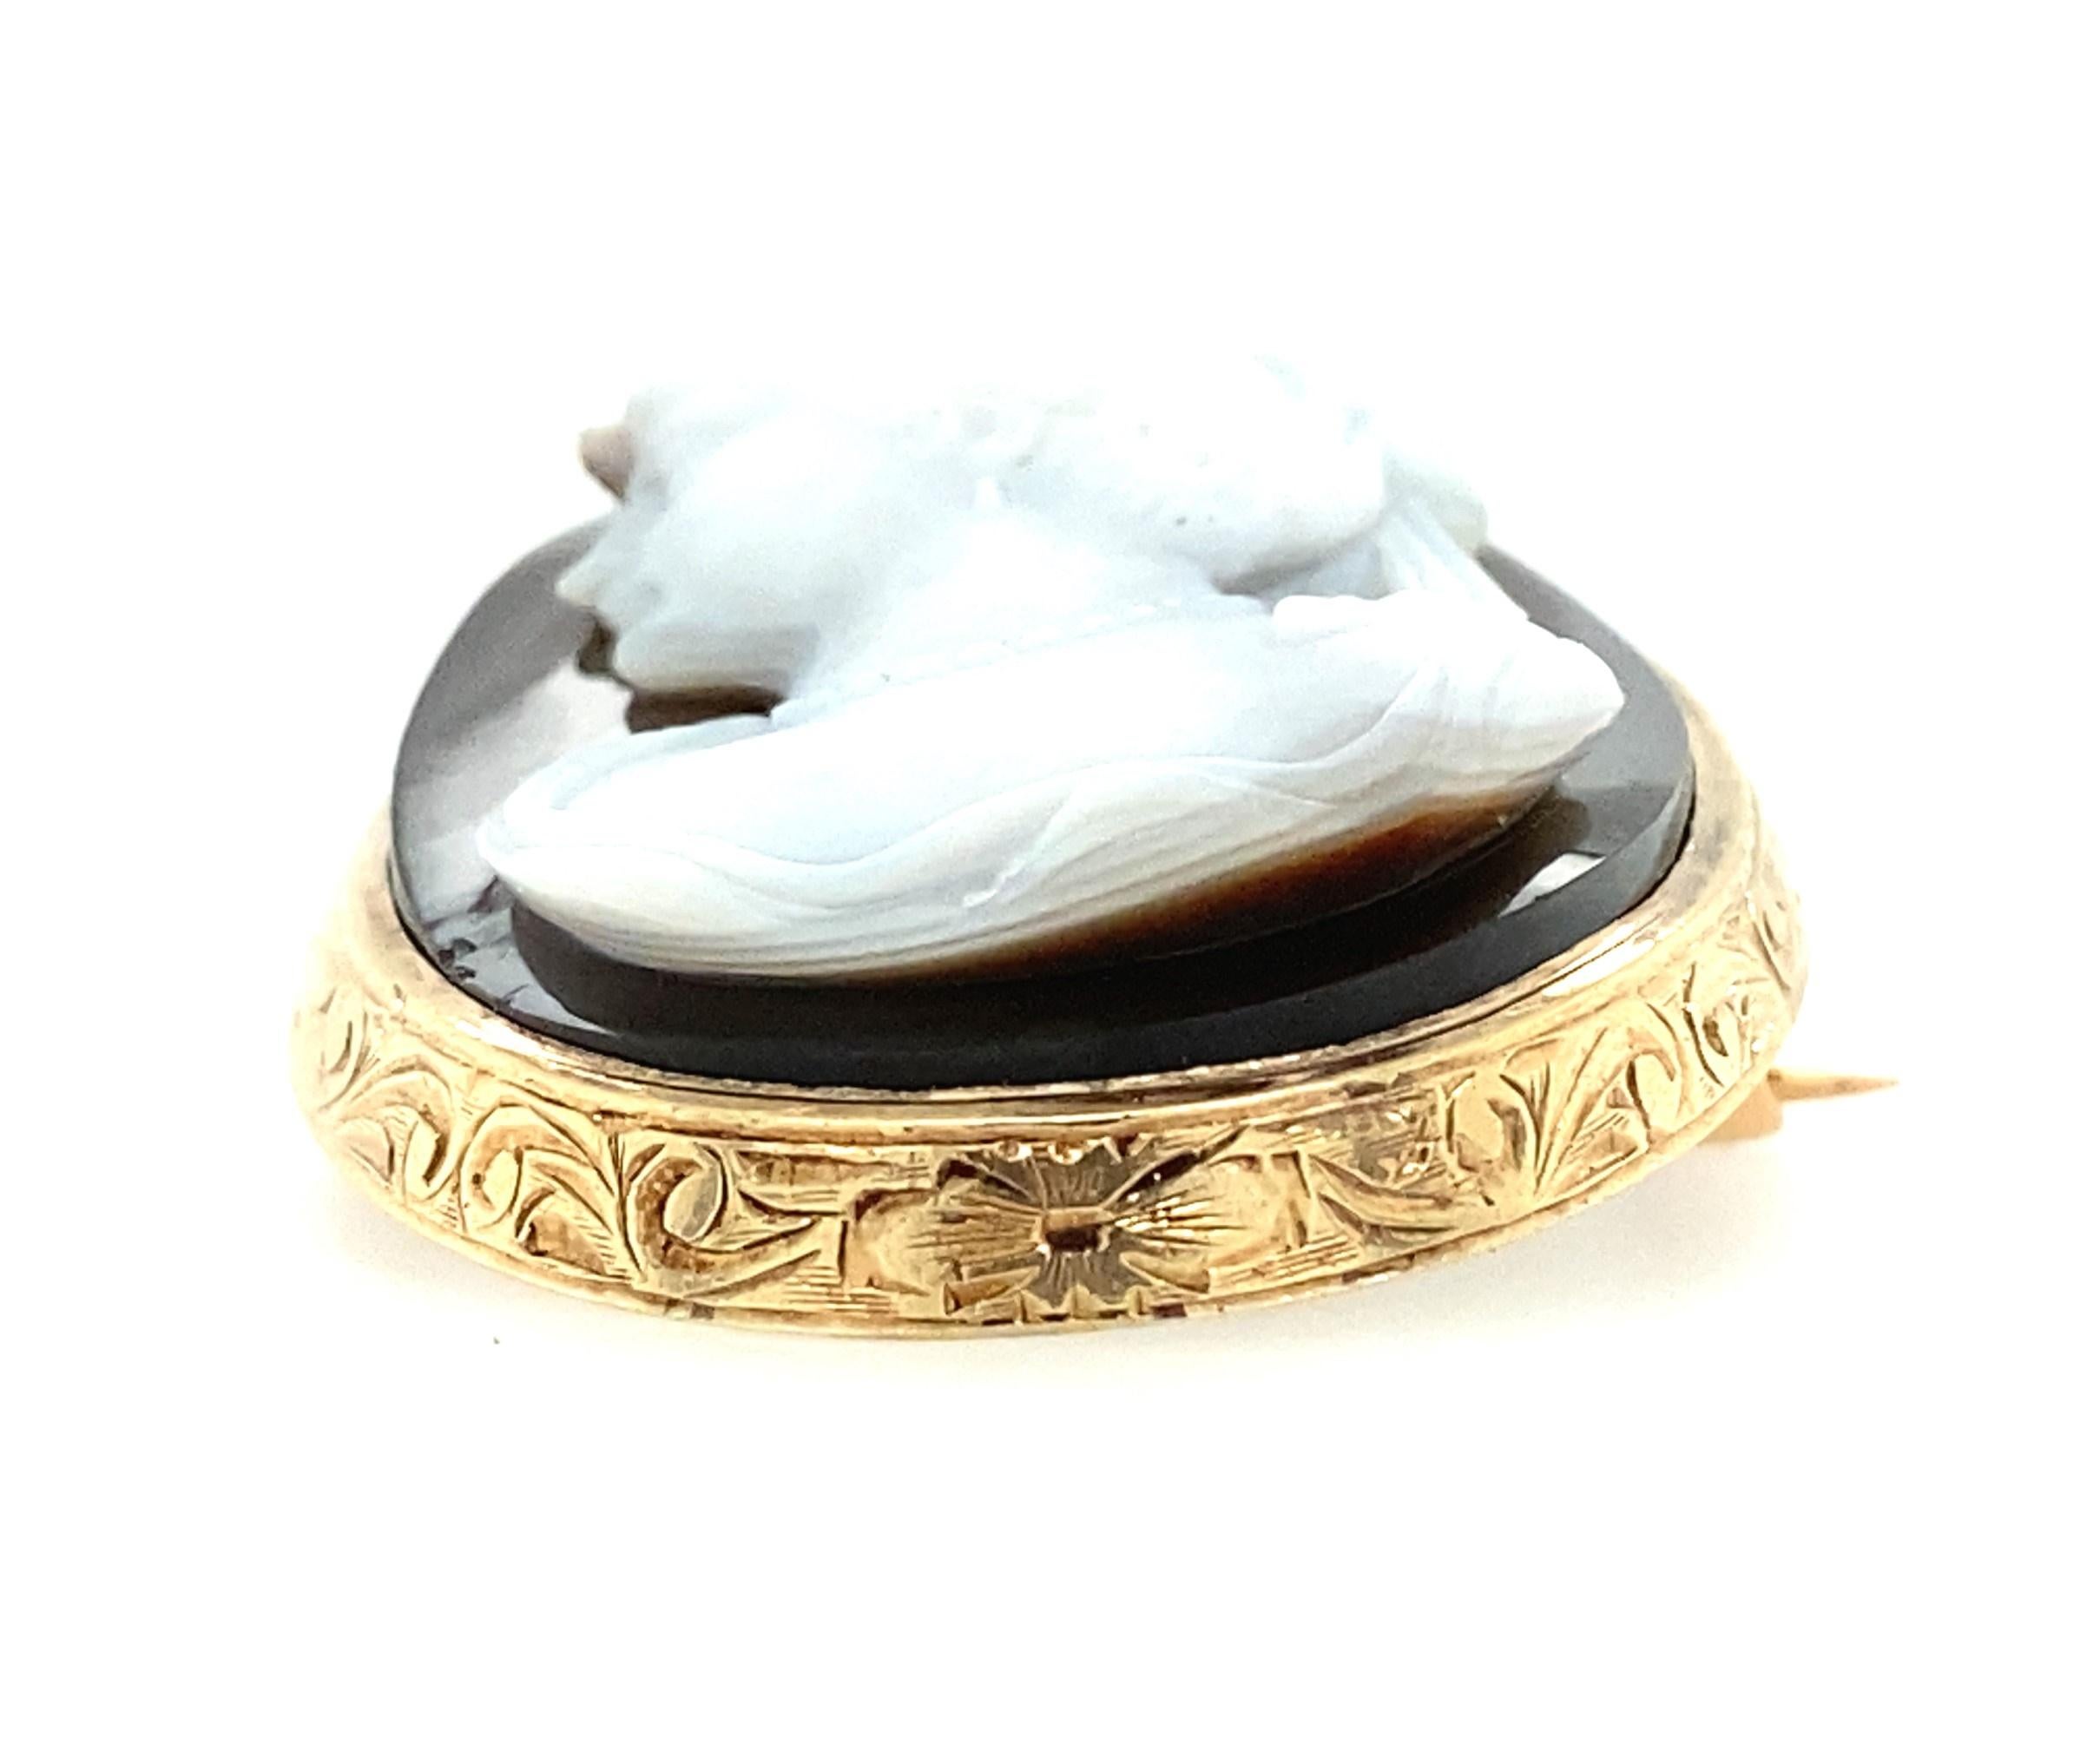 10K Antique Edwardian Yellow Gold Cameo Brooch Pendant Circa 1910 In Good Condition For Sale In Towson, MD